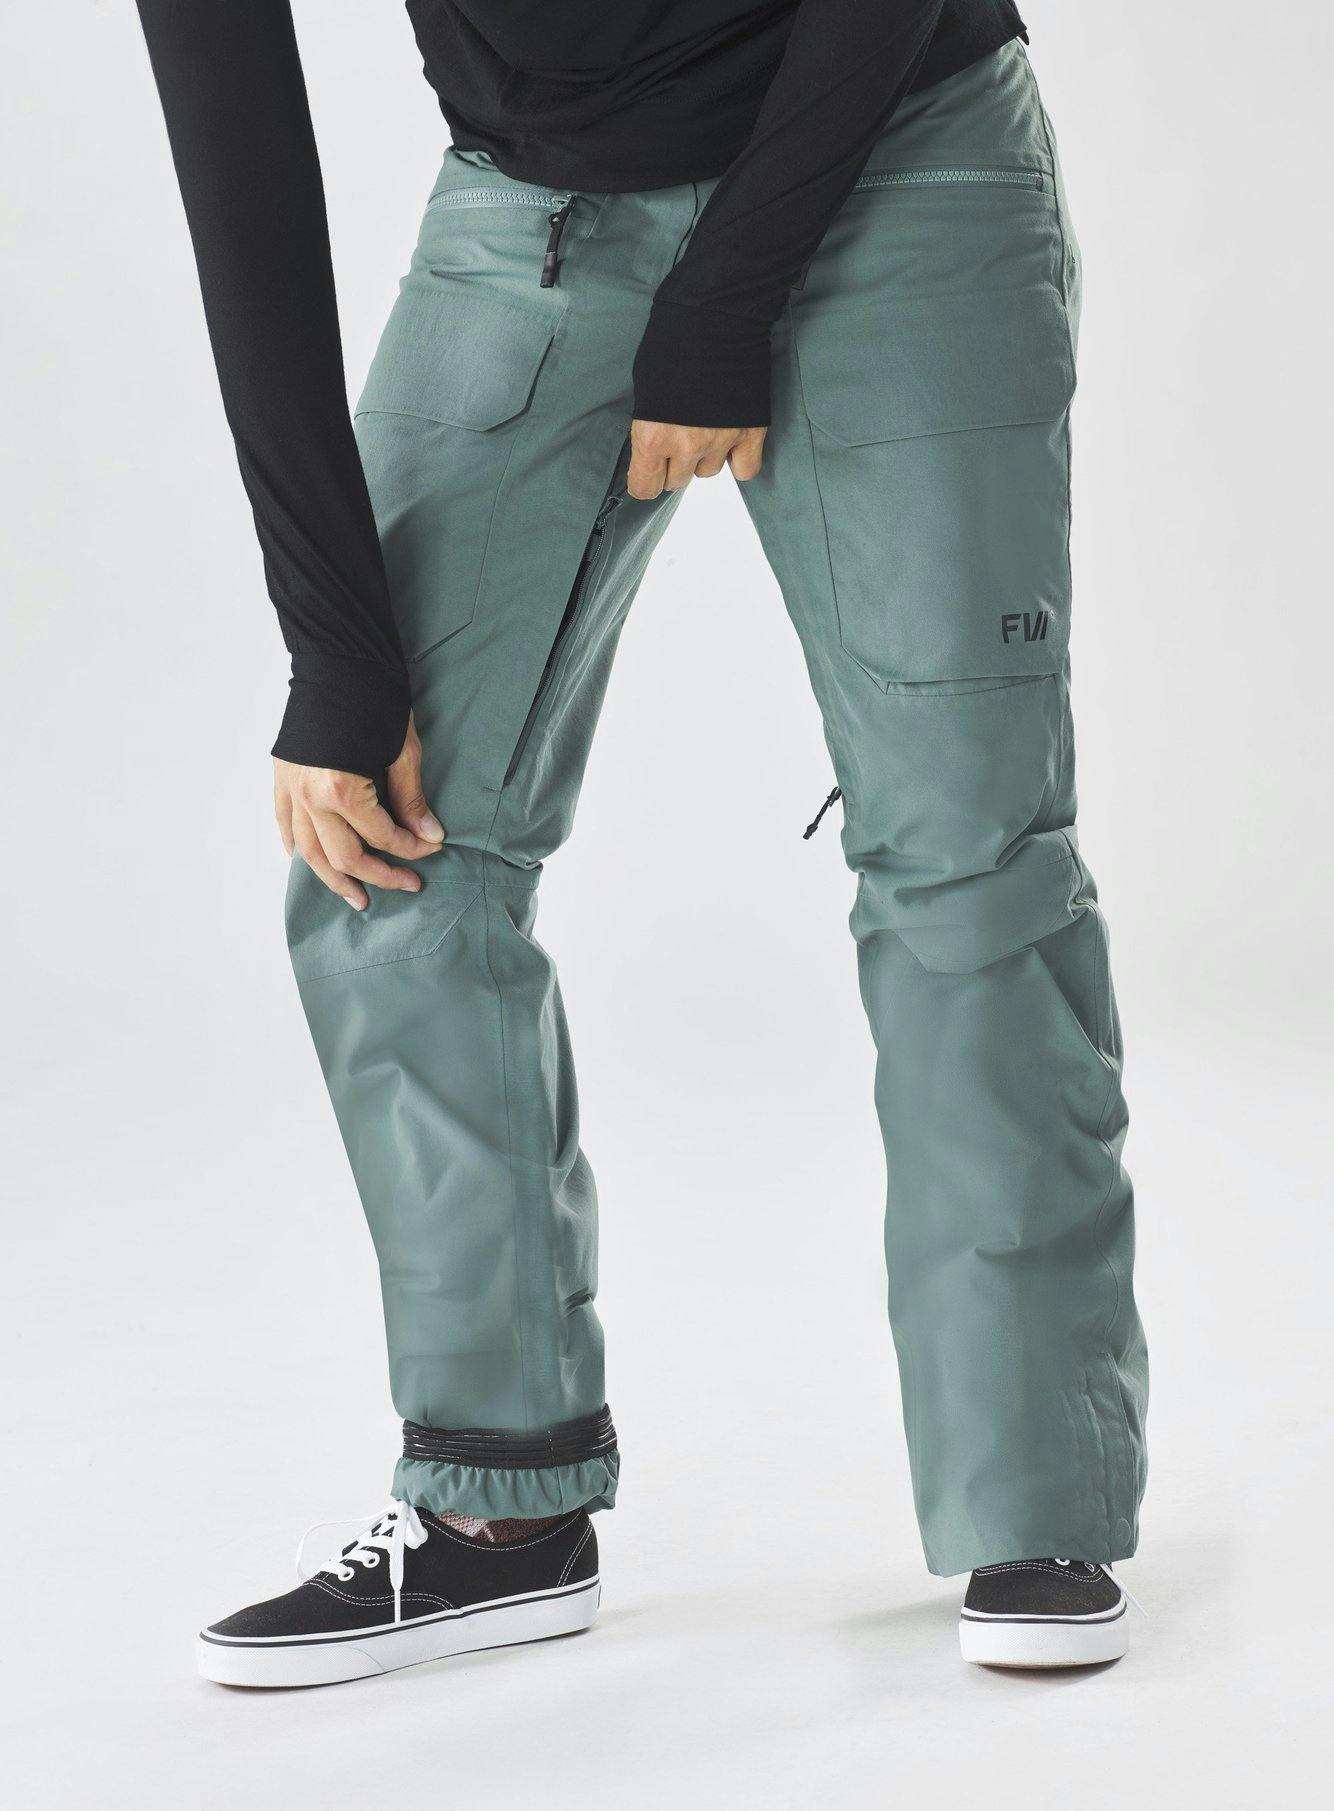 FW Women's Catalyst 2L Insulated Pants